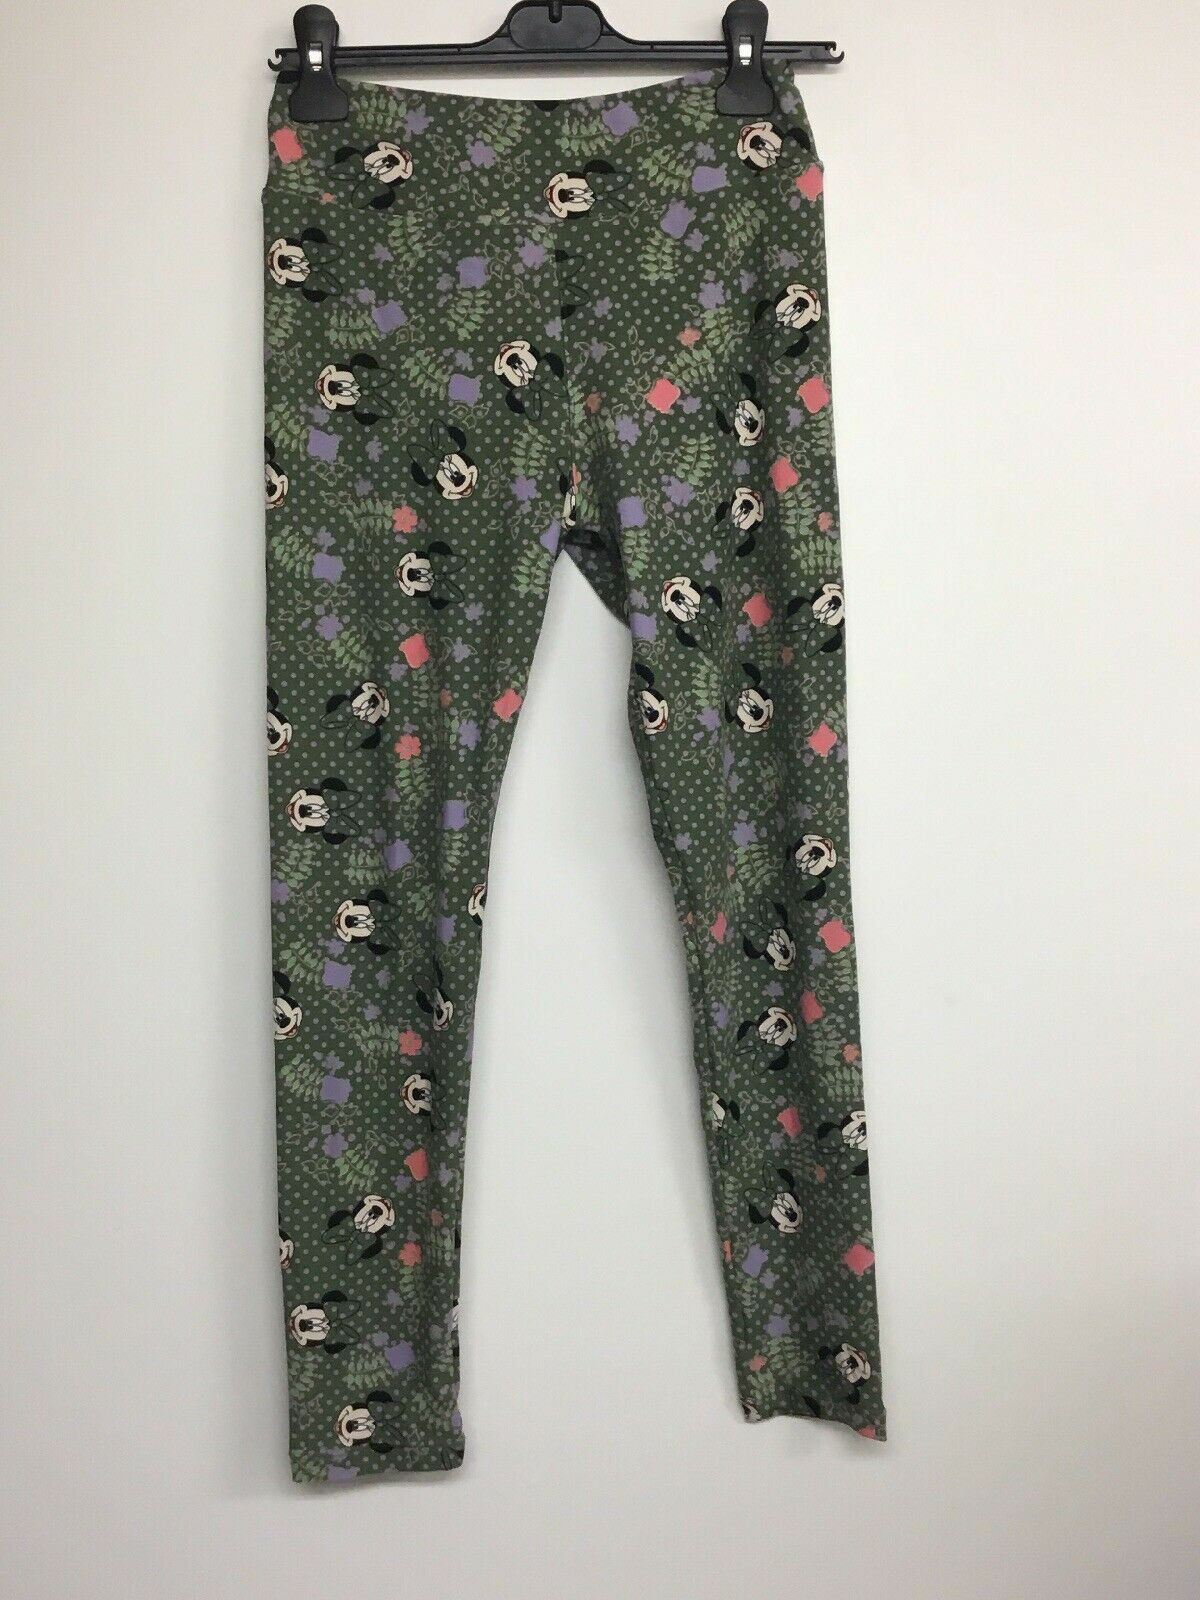 Lularoe Disney Leggings Green with Minnie Mouse, One Size, Green/purple ...